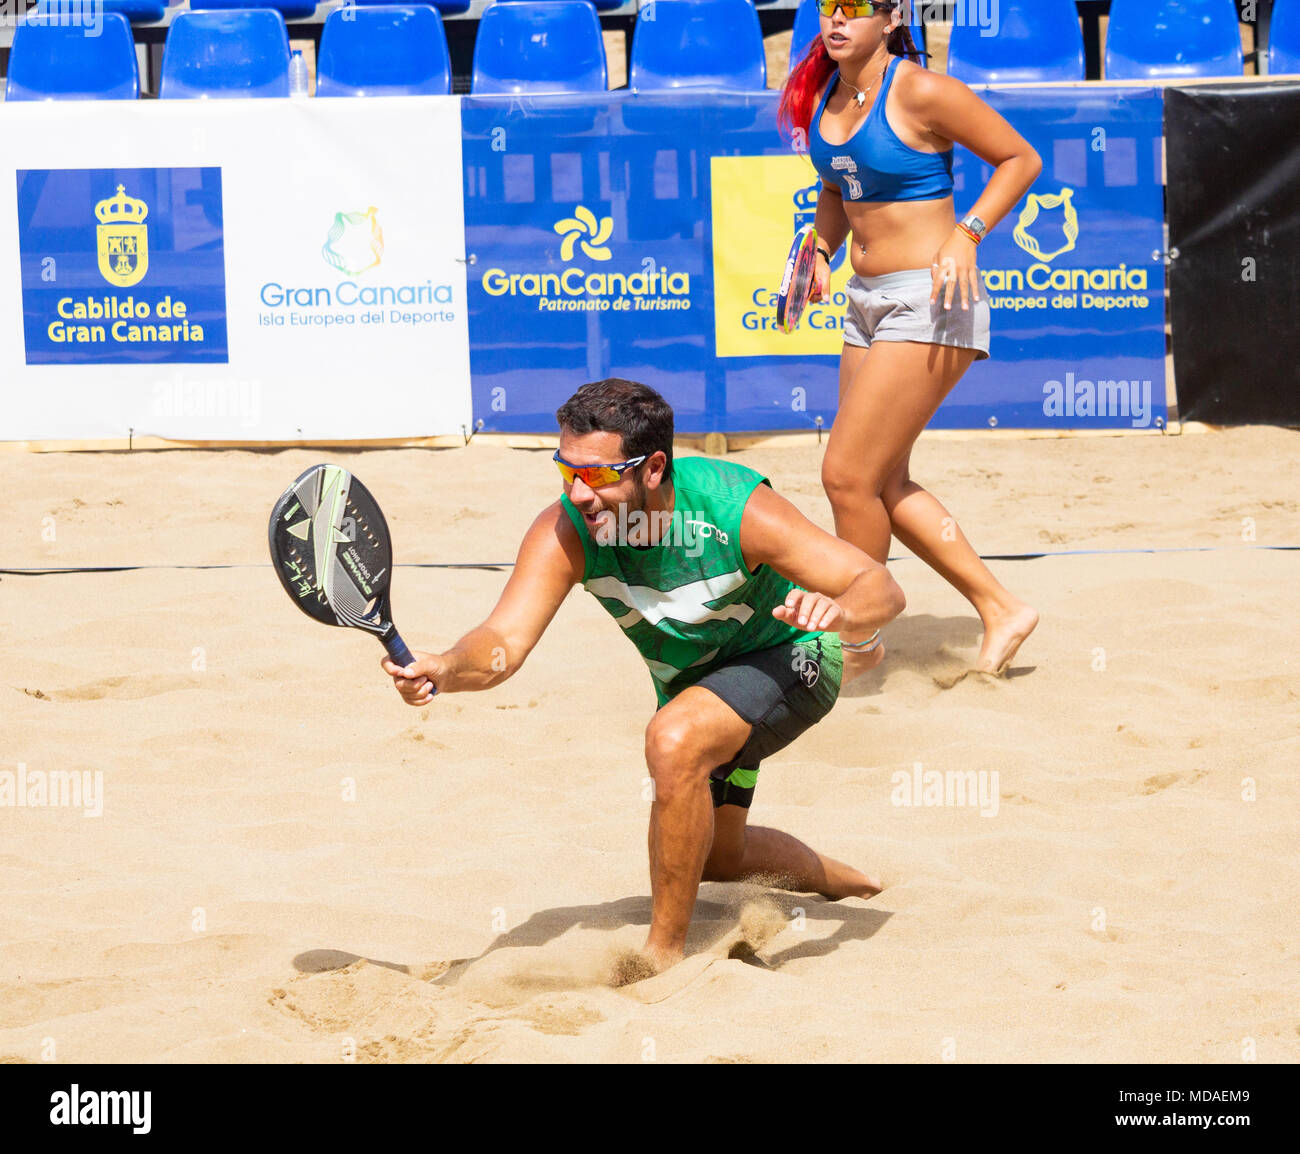 Las Palmas, Gran Canaria, Canary Islands, Spain. 19th April, 2018. With  15,000 Euros prize money at stake, the world`s top ranked beach tennis  players gather on the city beach in Las Palmas